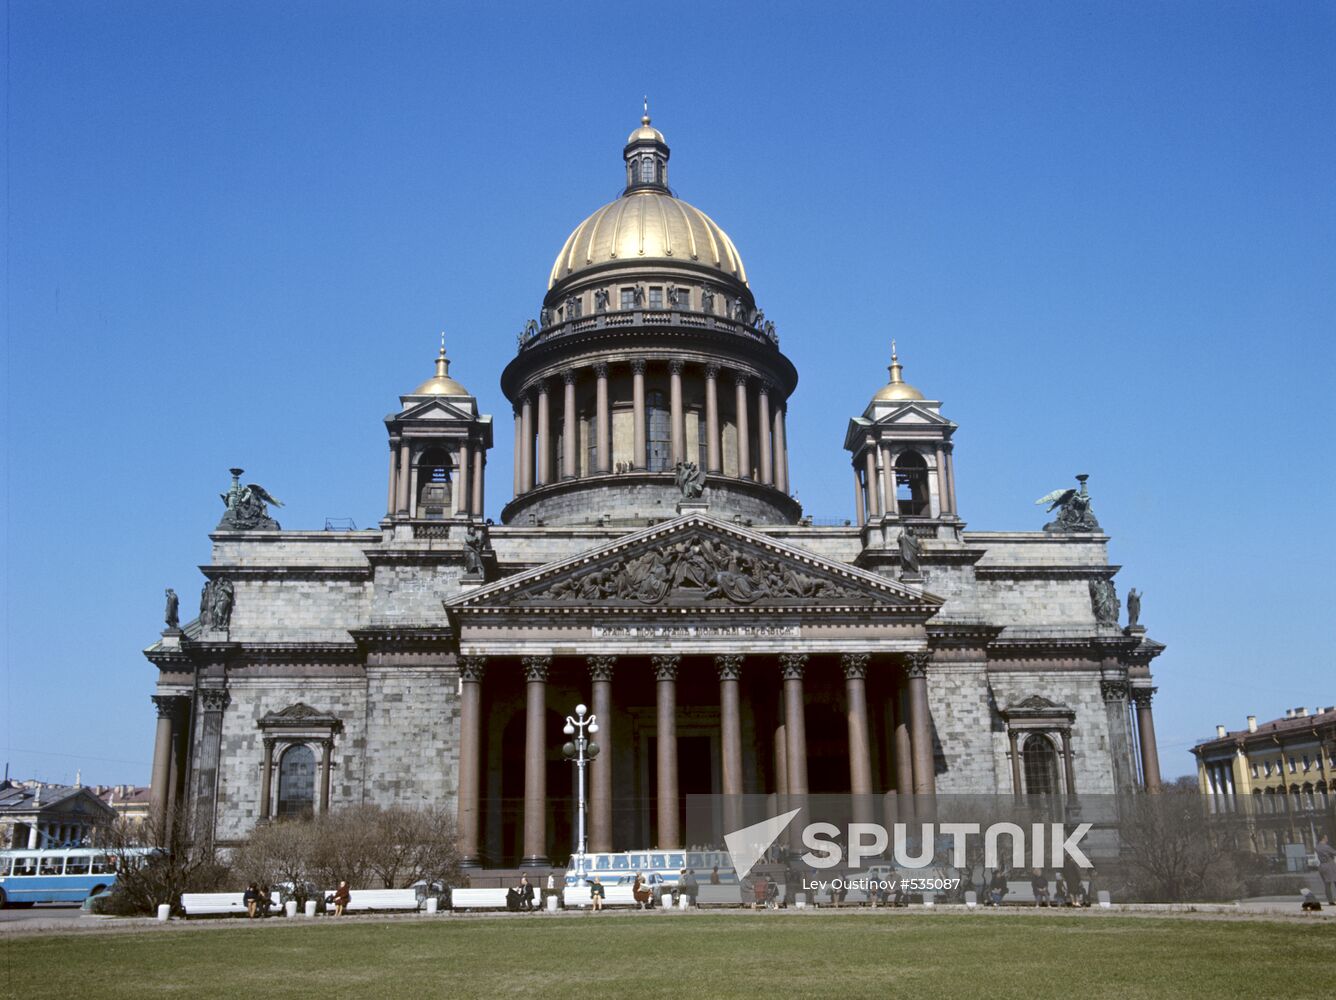 The Cathedral of St. Isaac in Leningrad